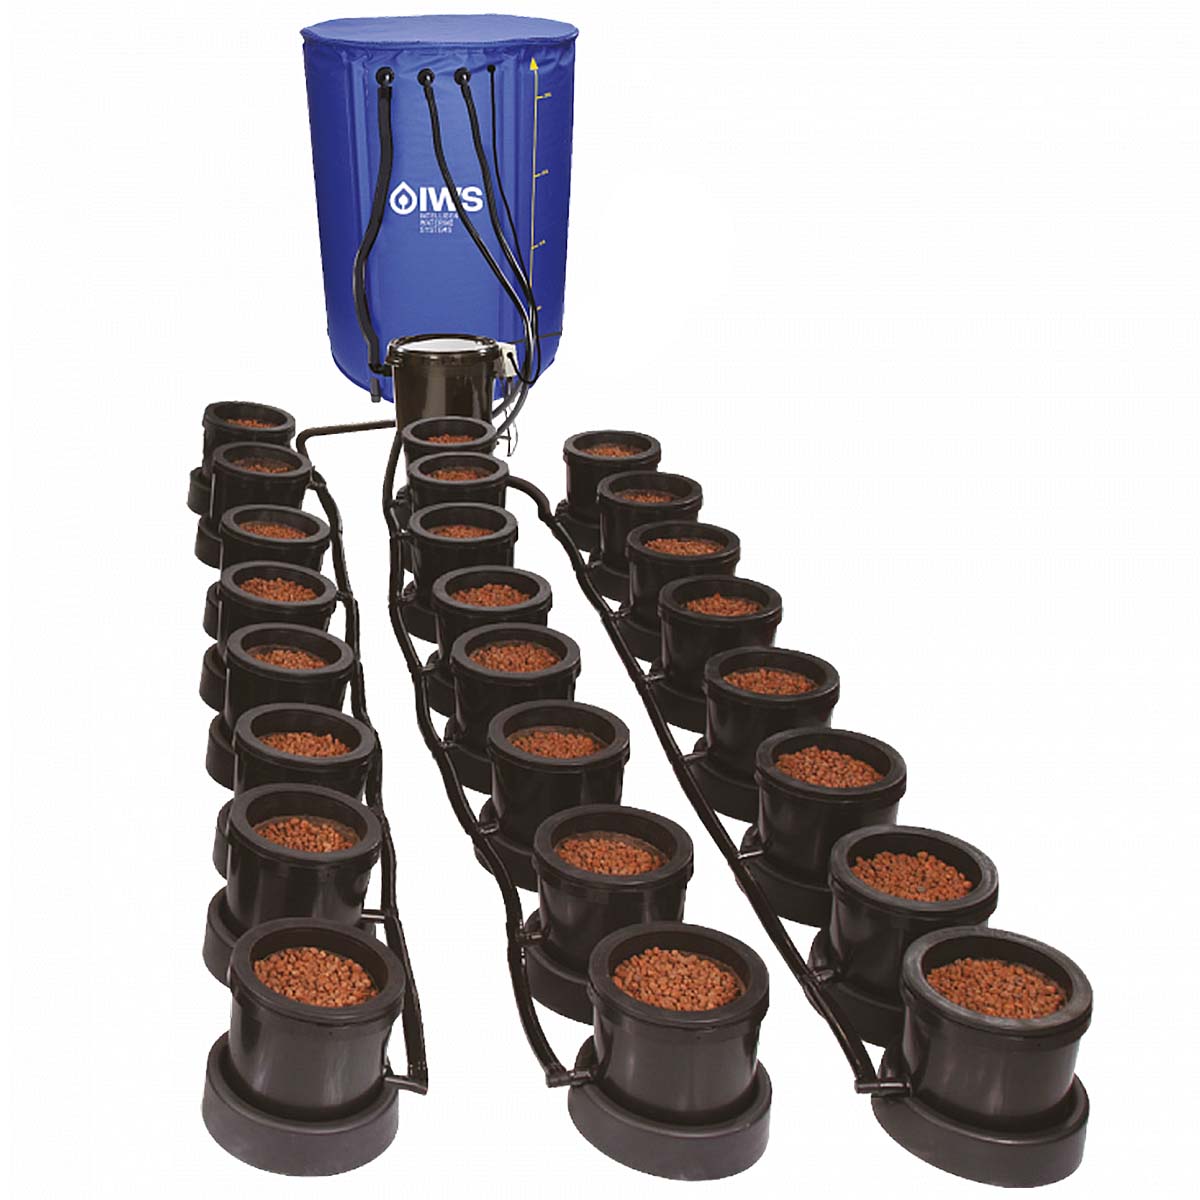 IWS Standard Flood & Drain Grow System with 10 Litre Punch Pots